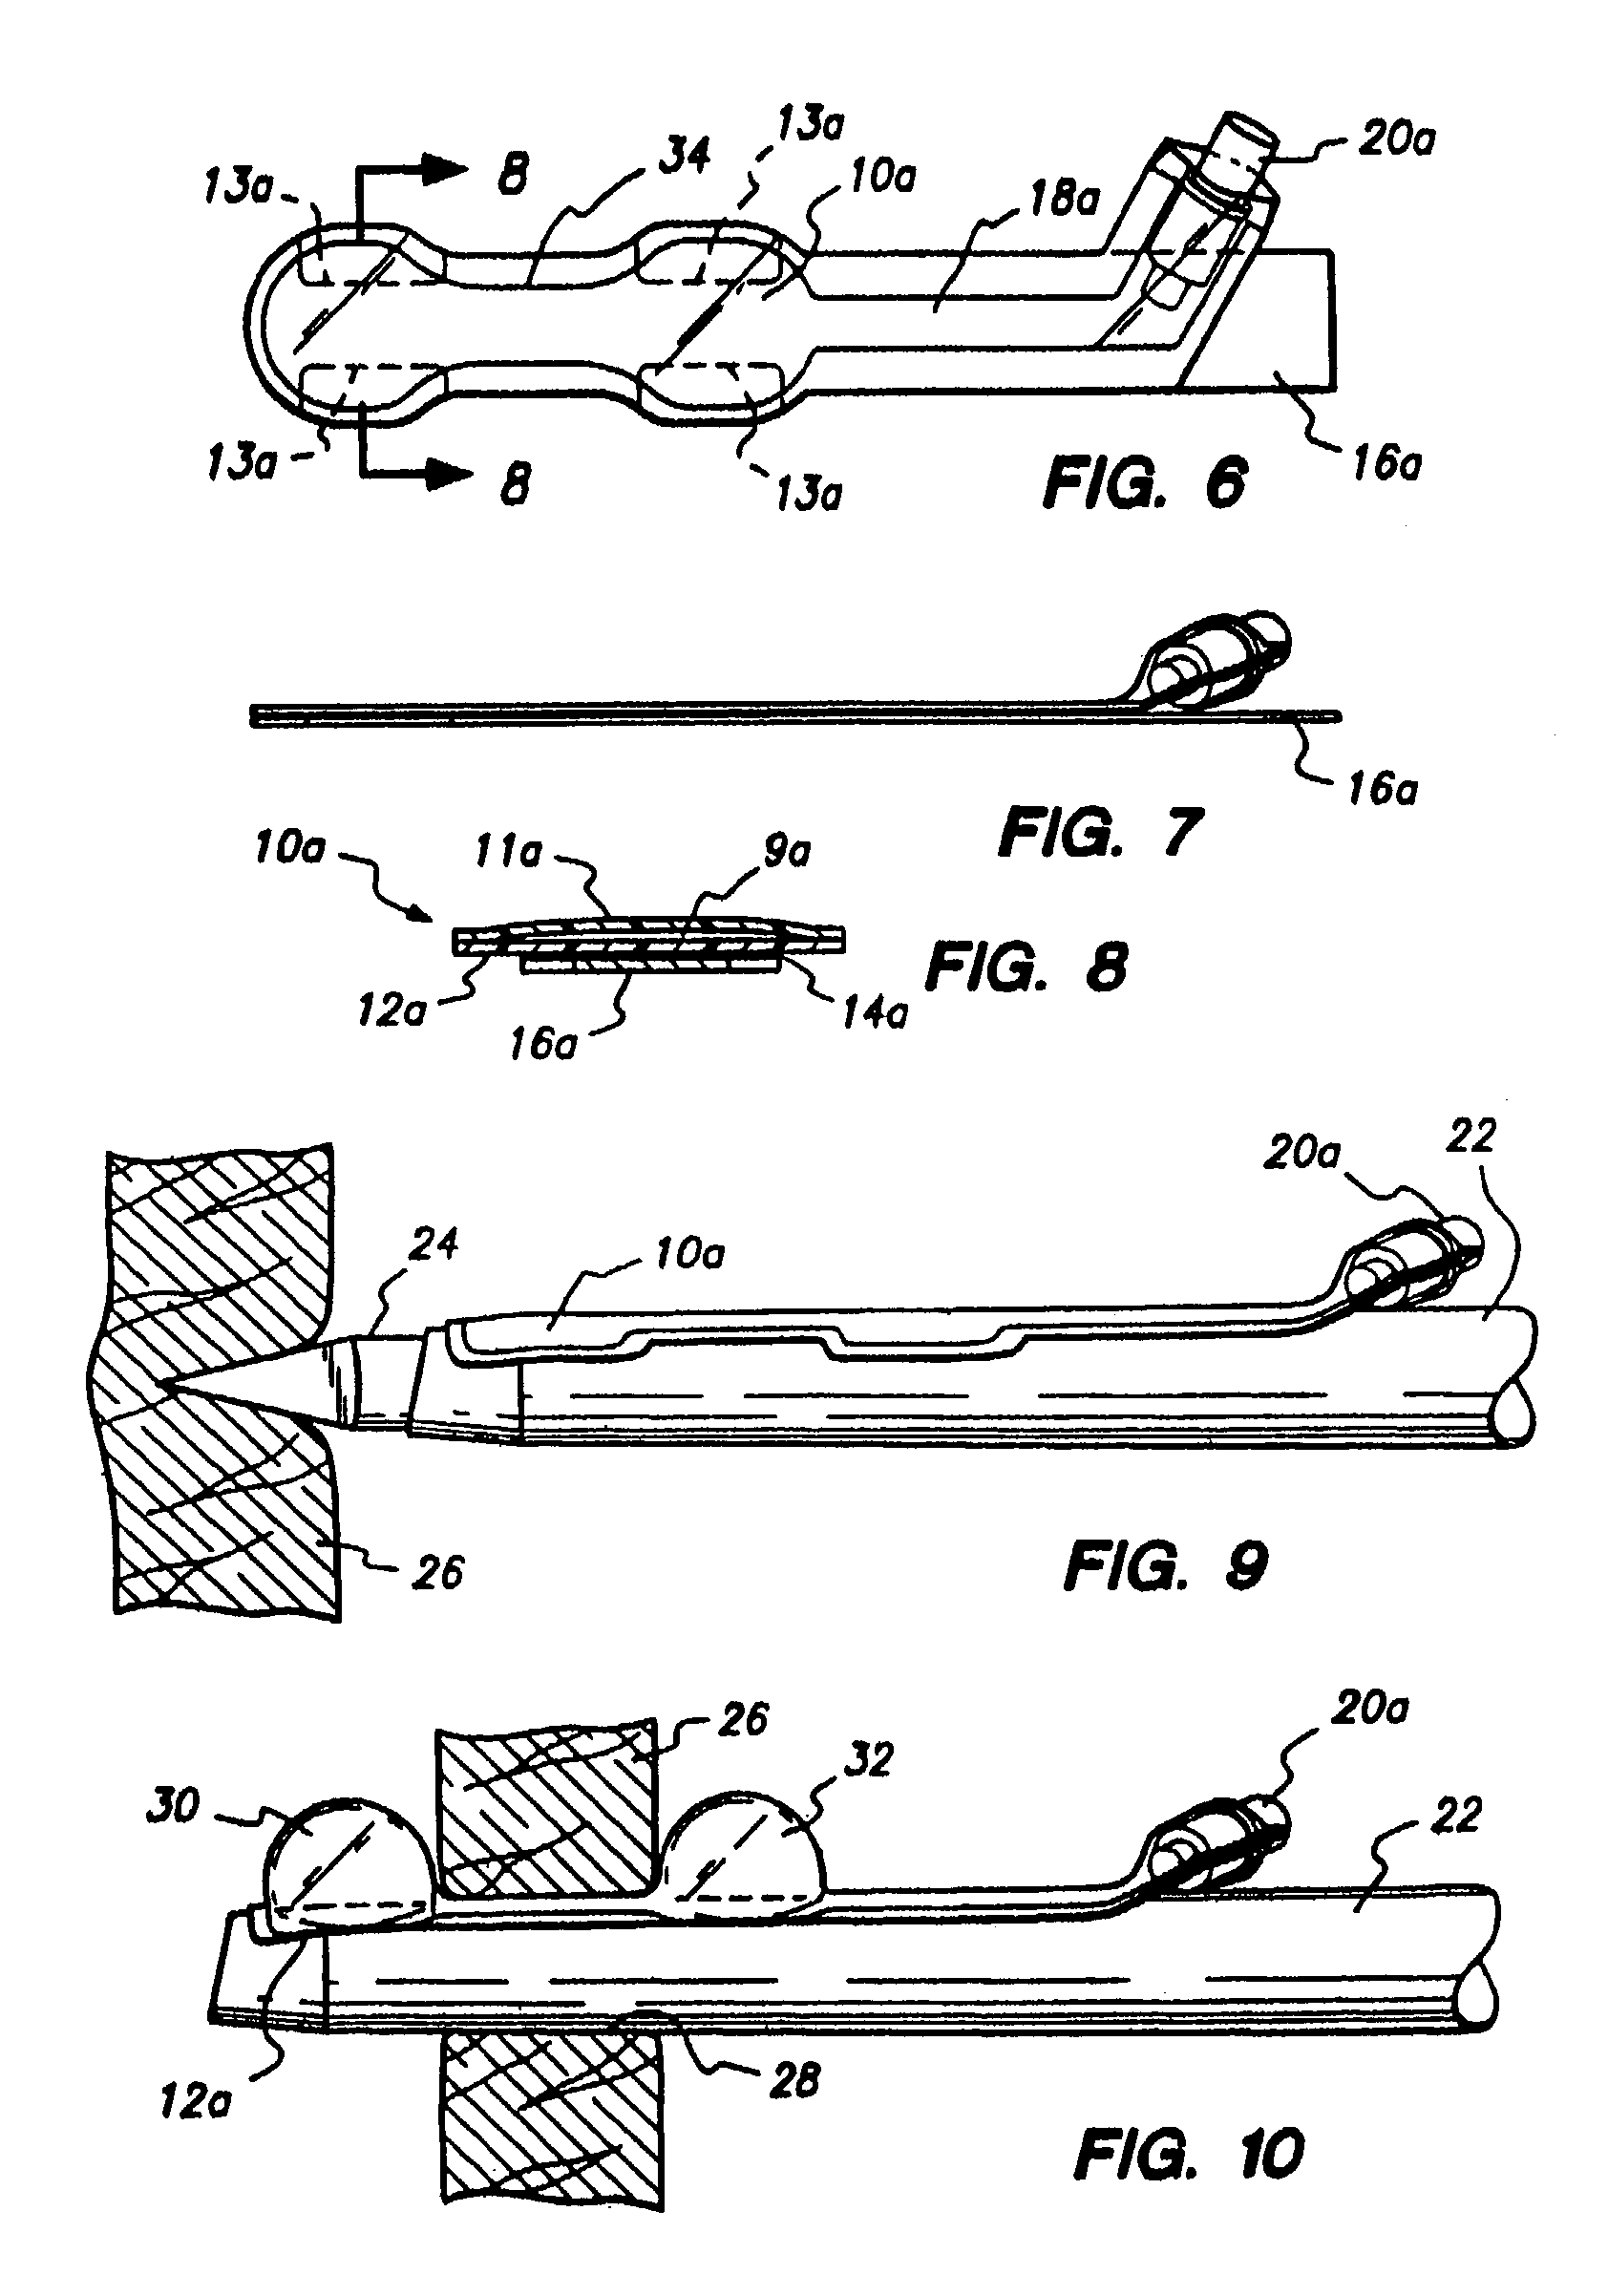 Method and apparatus for anchoring laparoscopic instruments